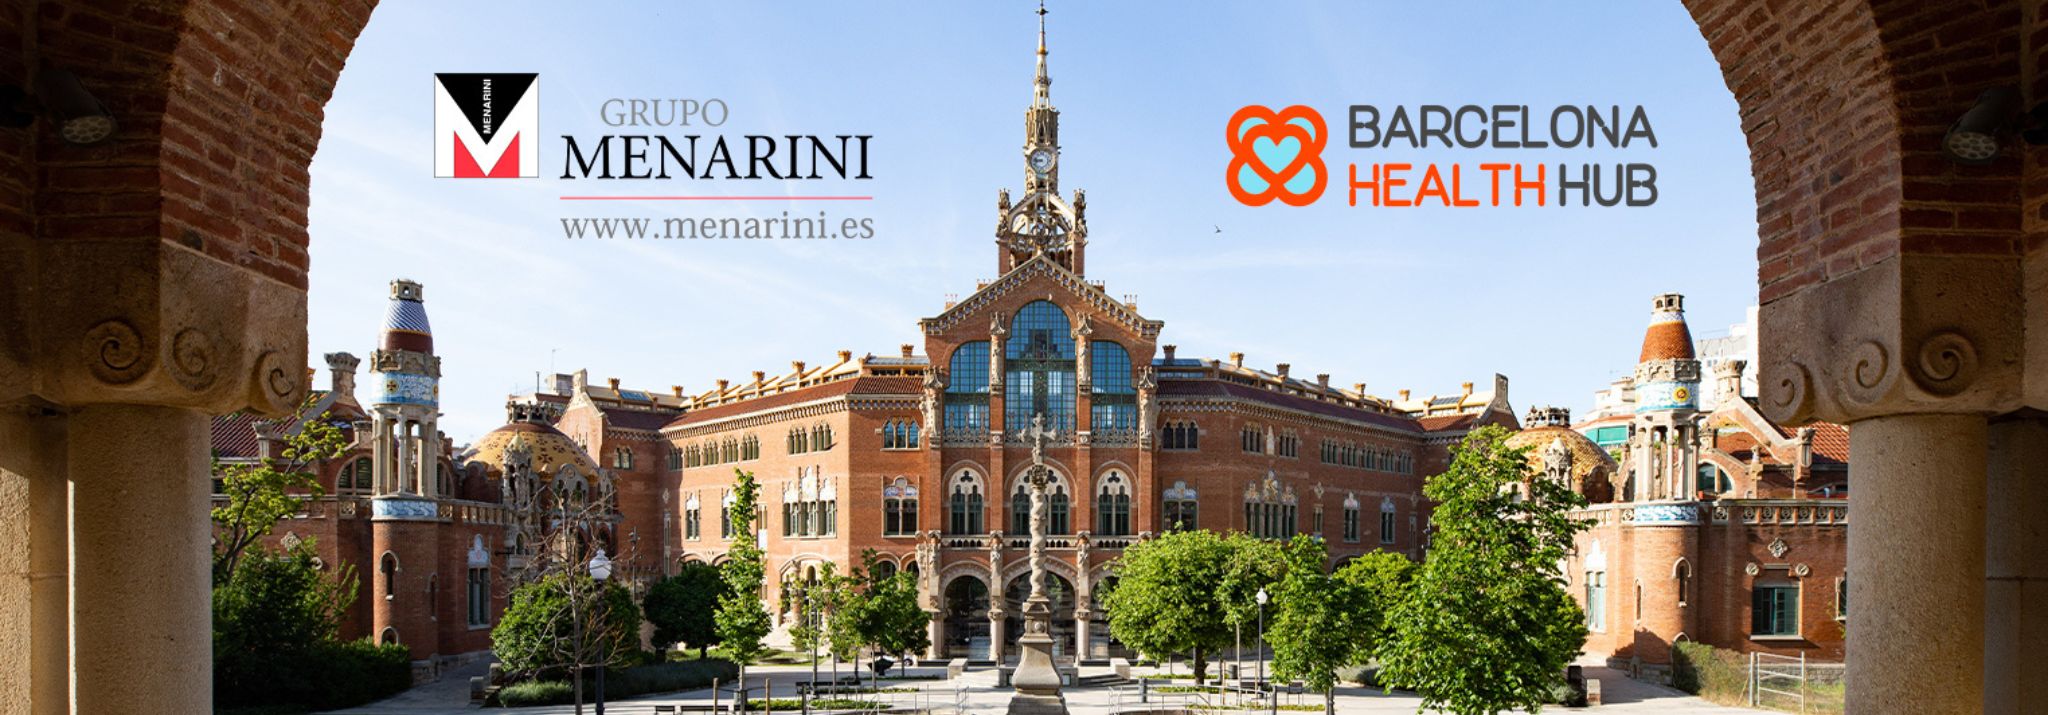 Menarini and Barcelona Health Hub join forces to promote the incorporation of digital health innovation into the healthcare field